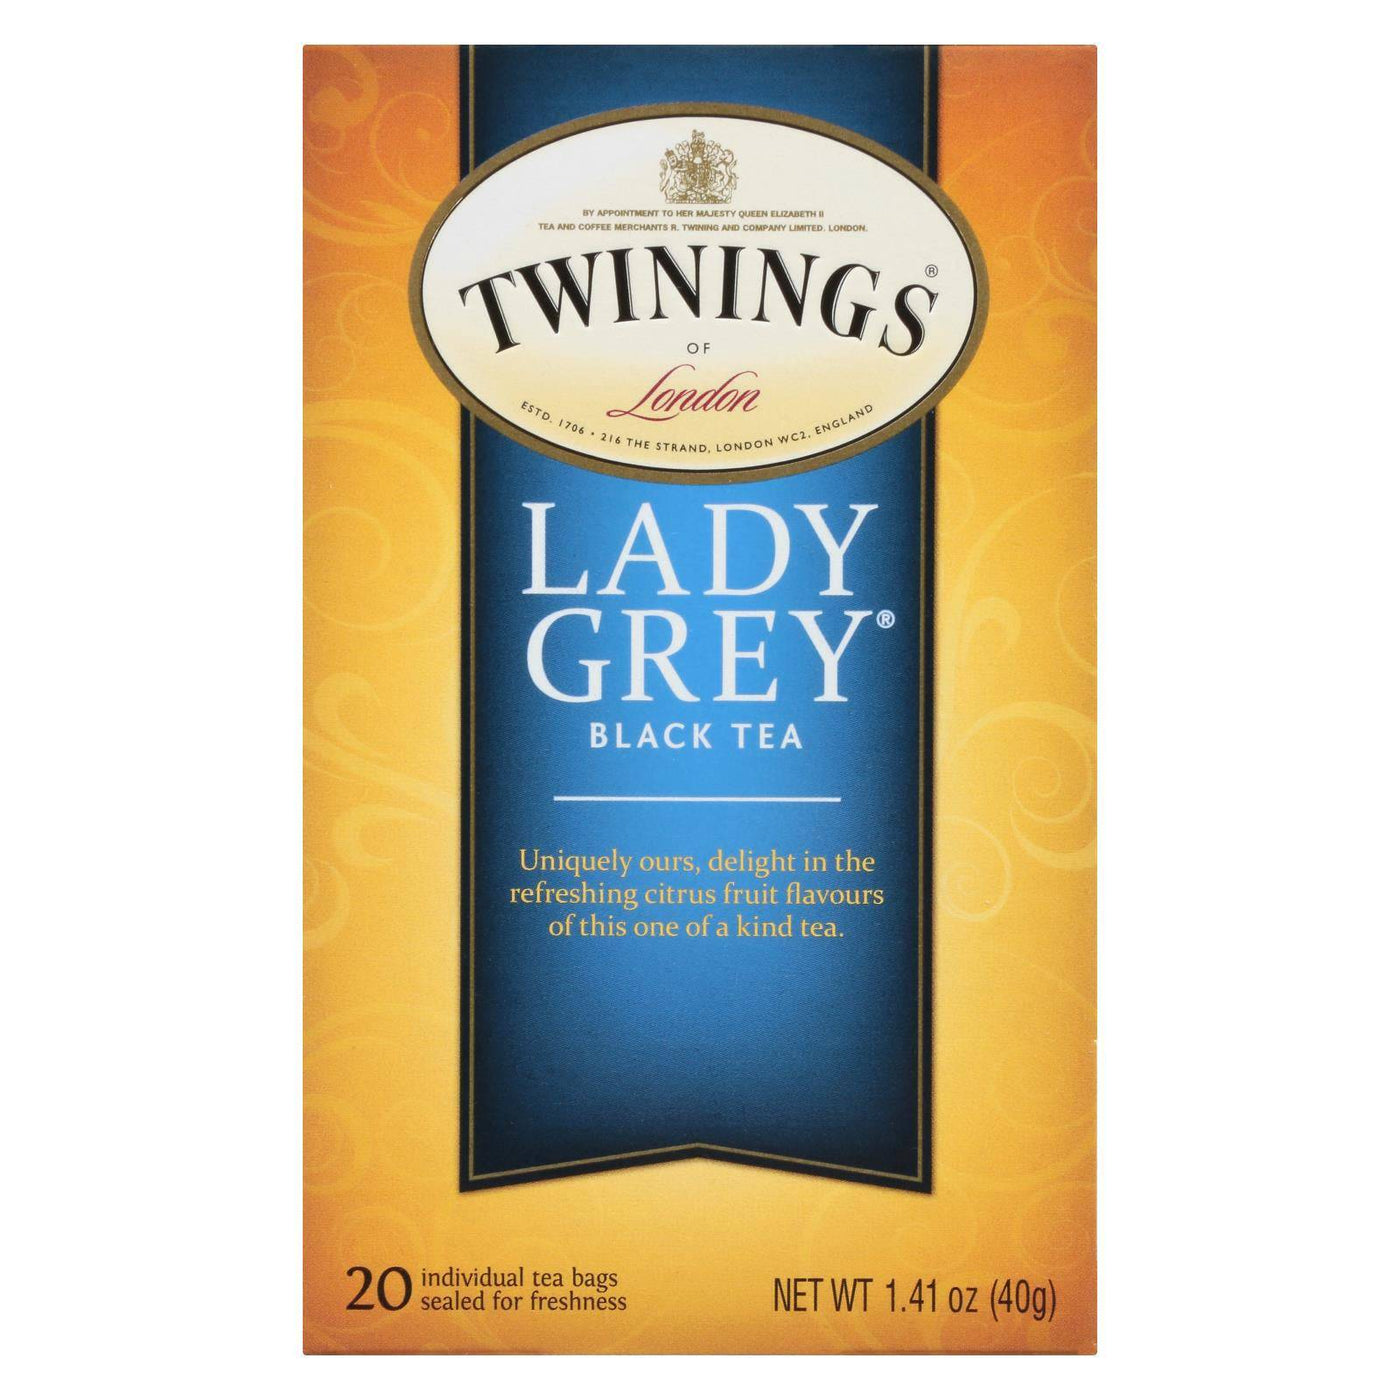 Twinings Tea Black Tea - Lady Grey - Case Of 6 - 20 Bags | OnlyNaturals.us